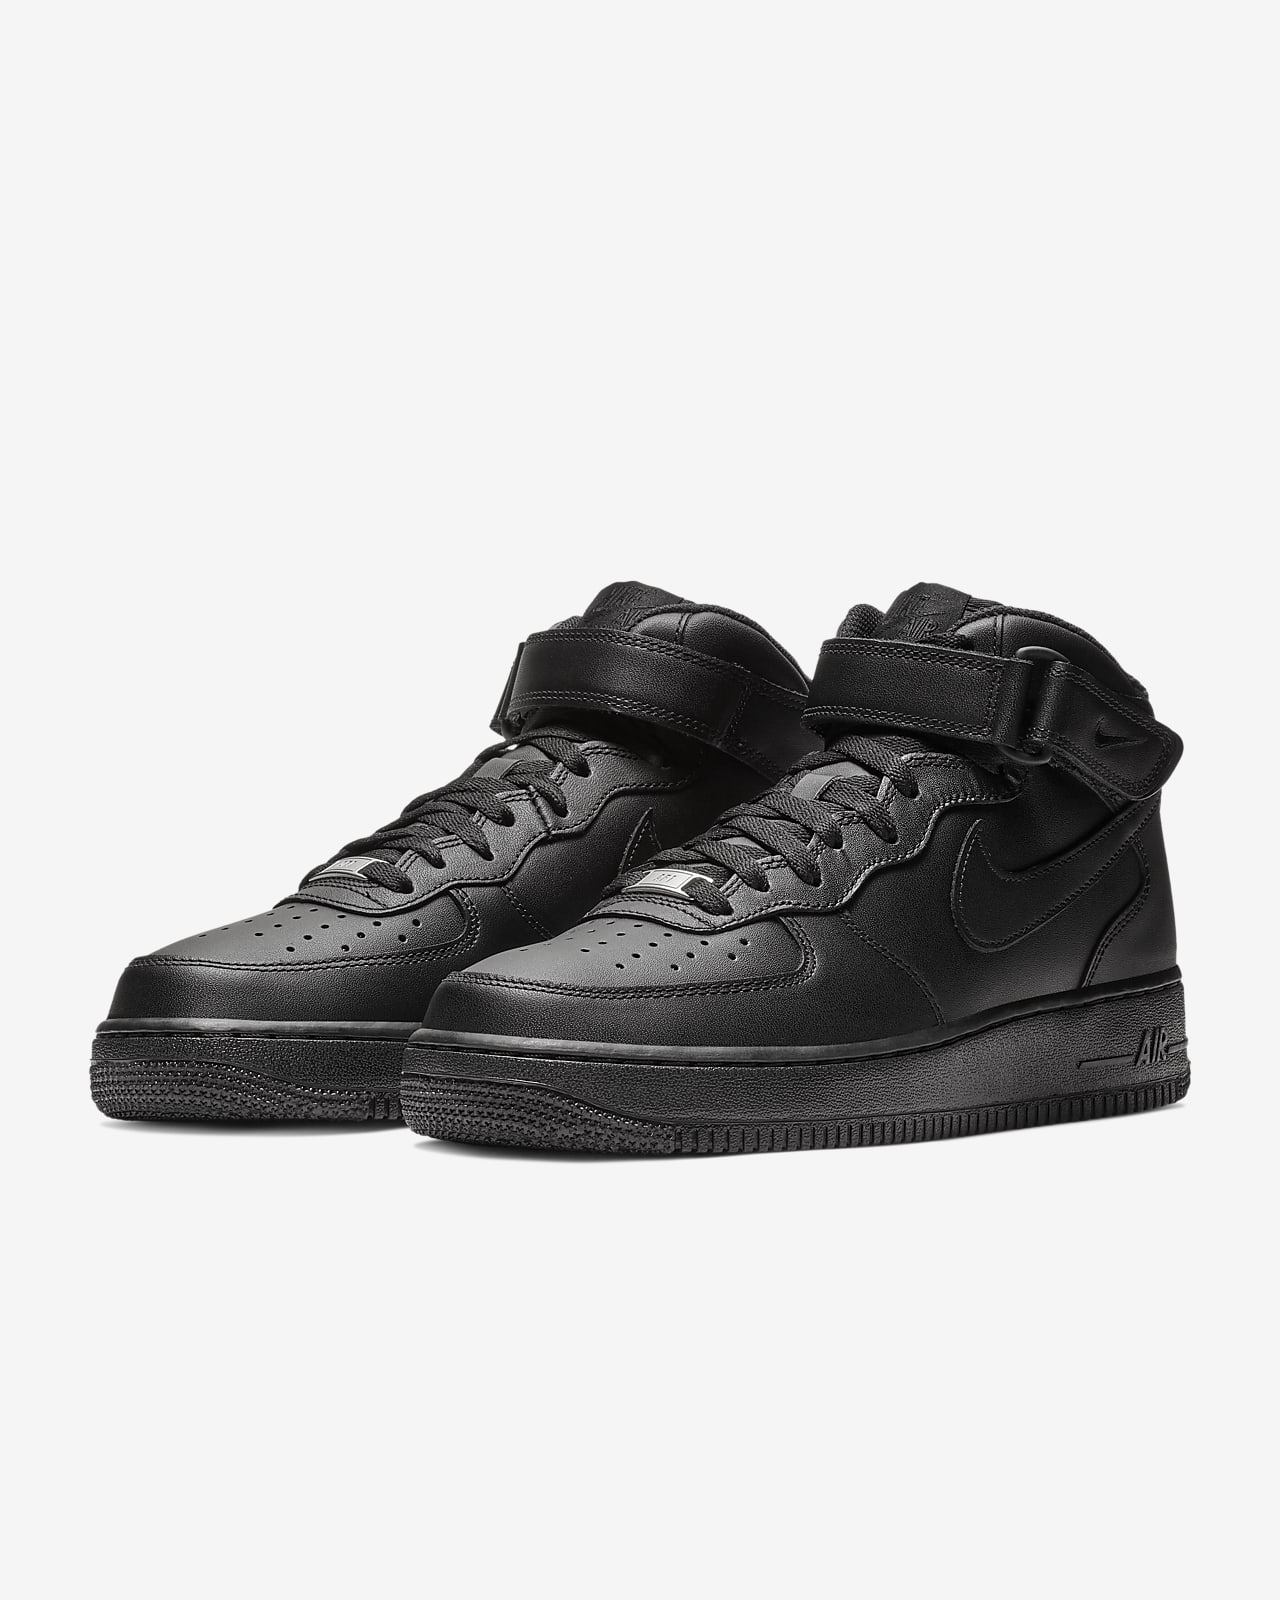 nike air force 1 mid size 6